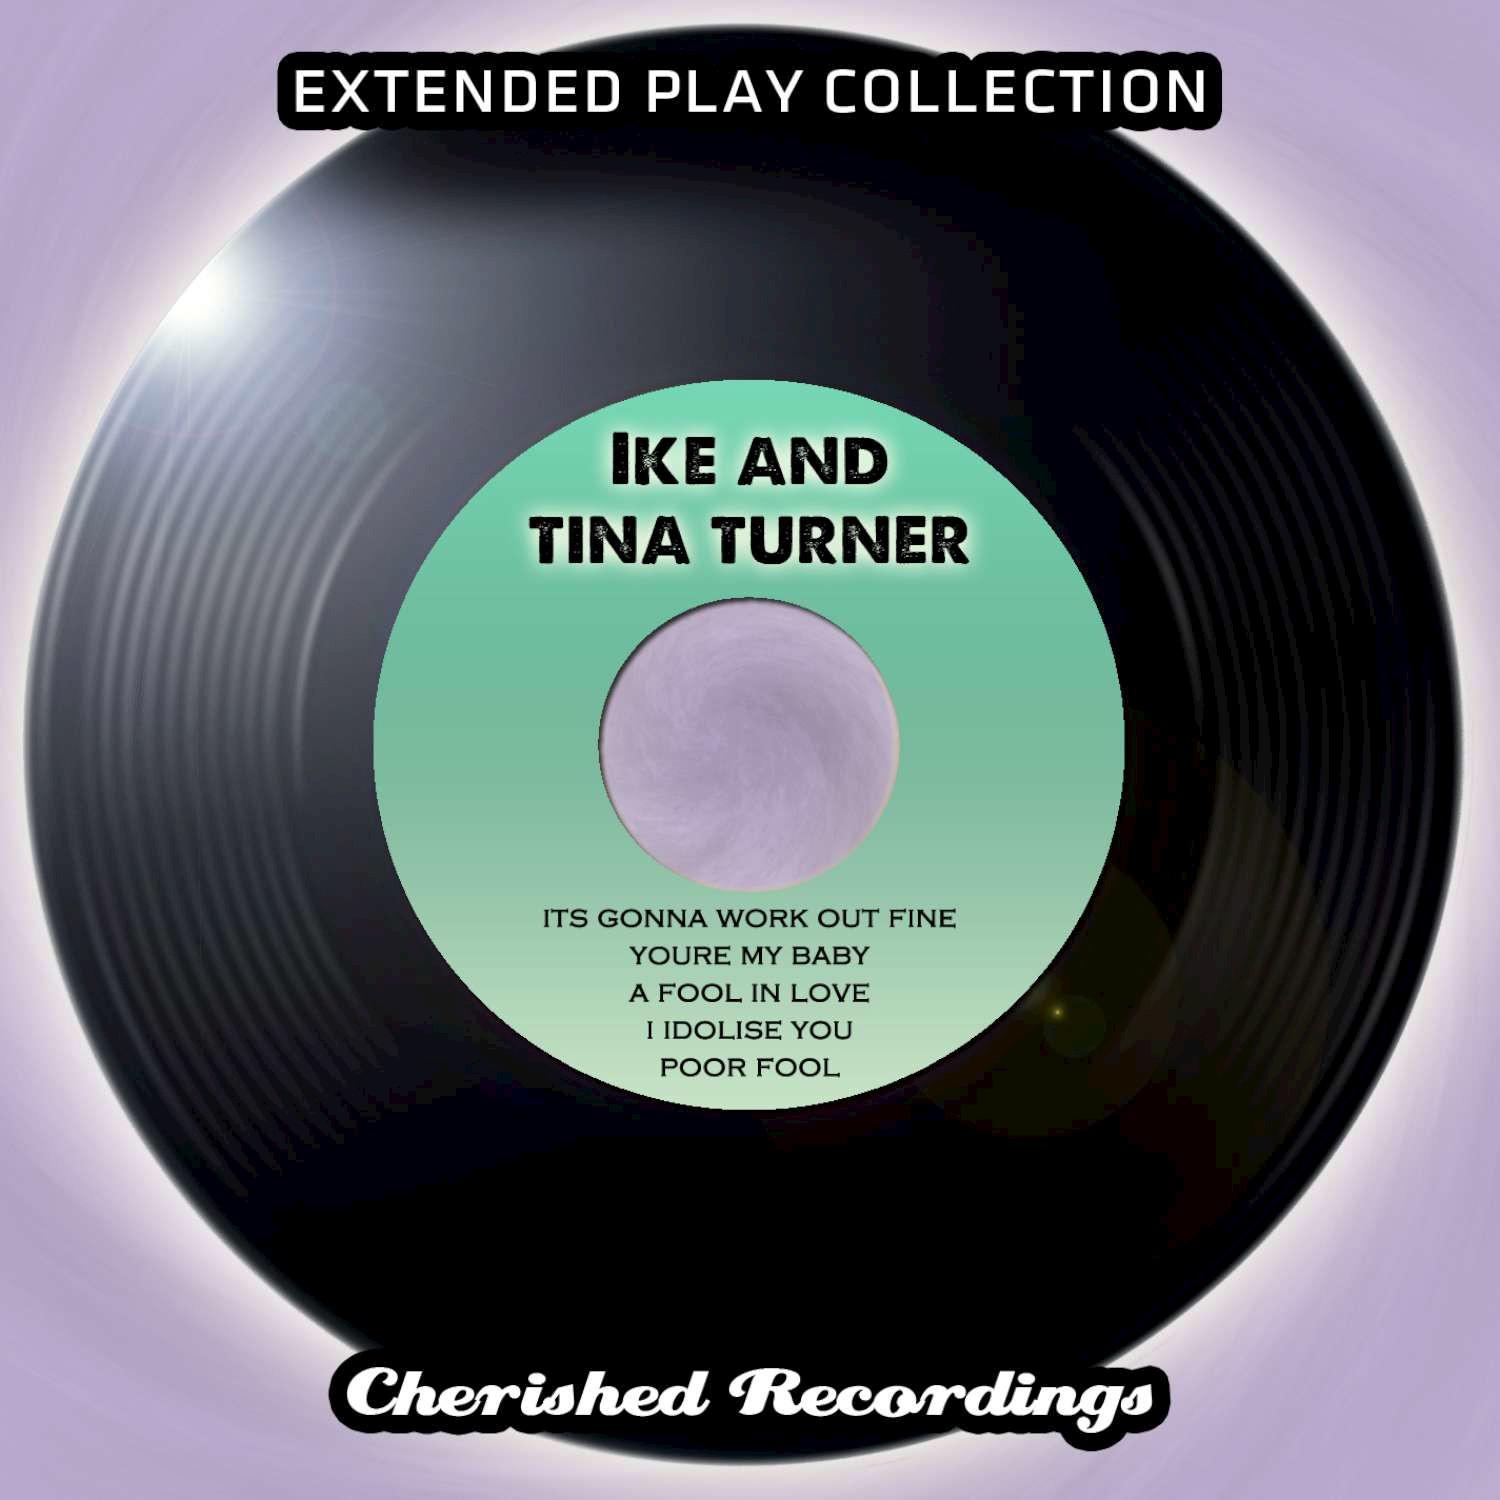 The Extended Play Collection, Vol. 136